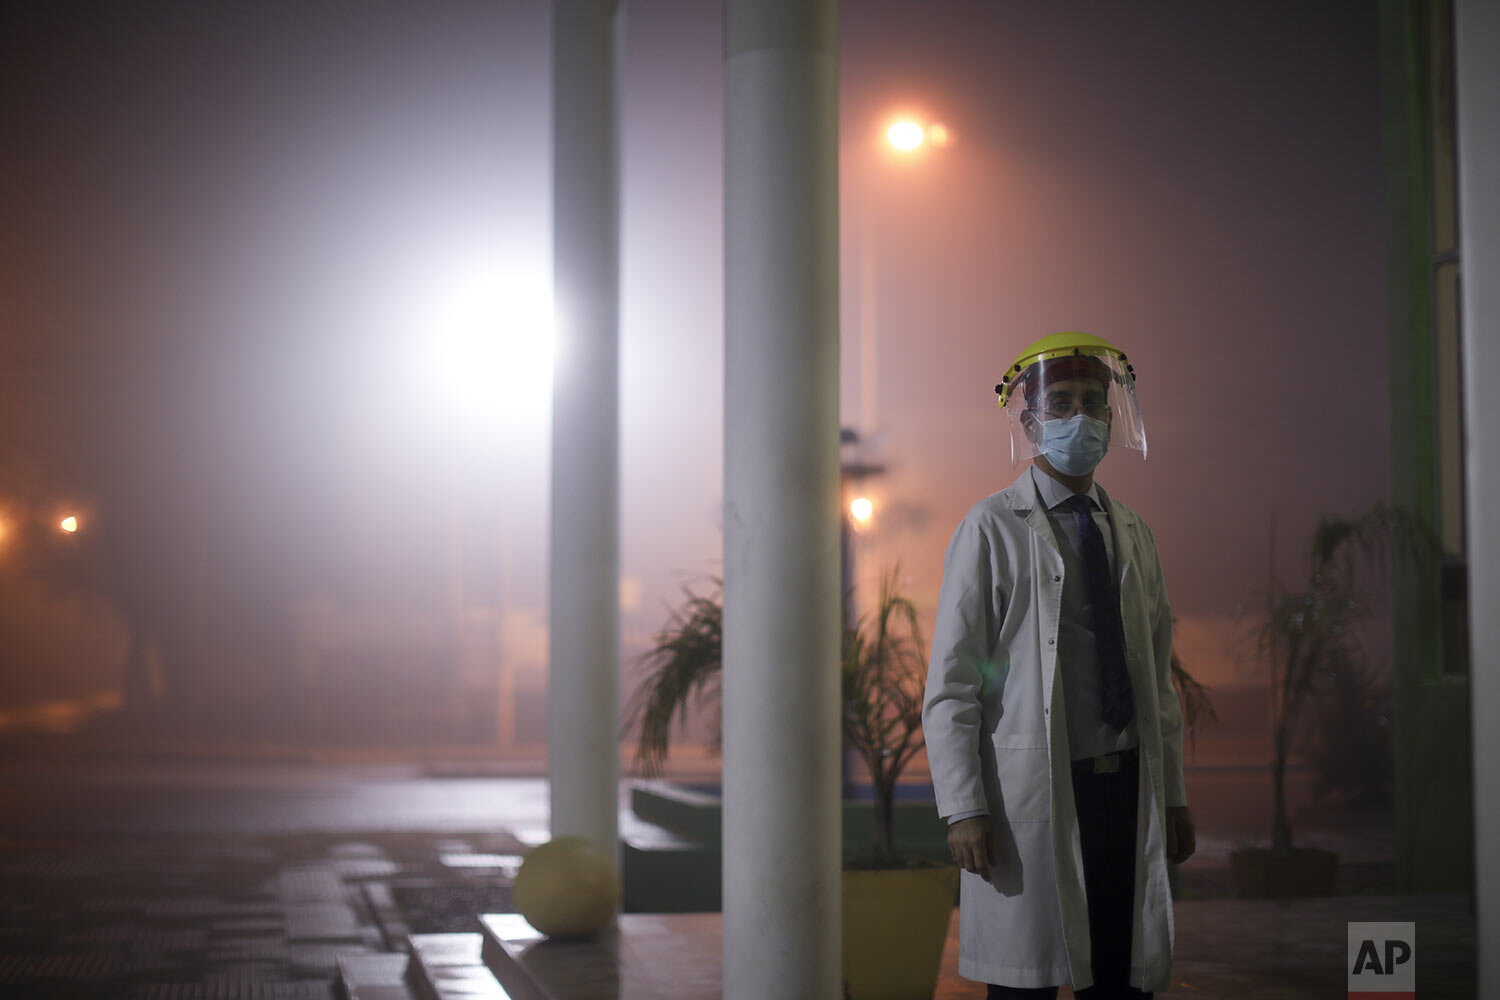  Dr. Matias Norte stands outside a hospital during a government-ordered lockdown to curb the spread of the new coronavirus in Buenos Aires, Argentina, Saturday, July 18, 2020. (AP Photo/Natacha Pisarenko) 